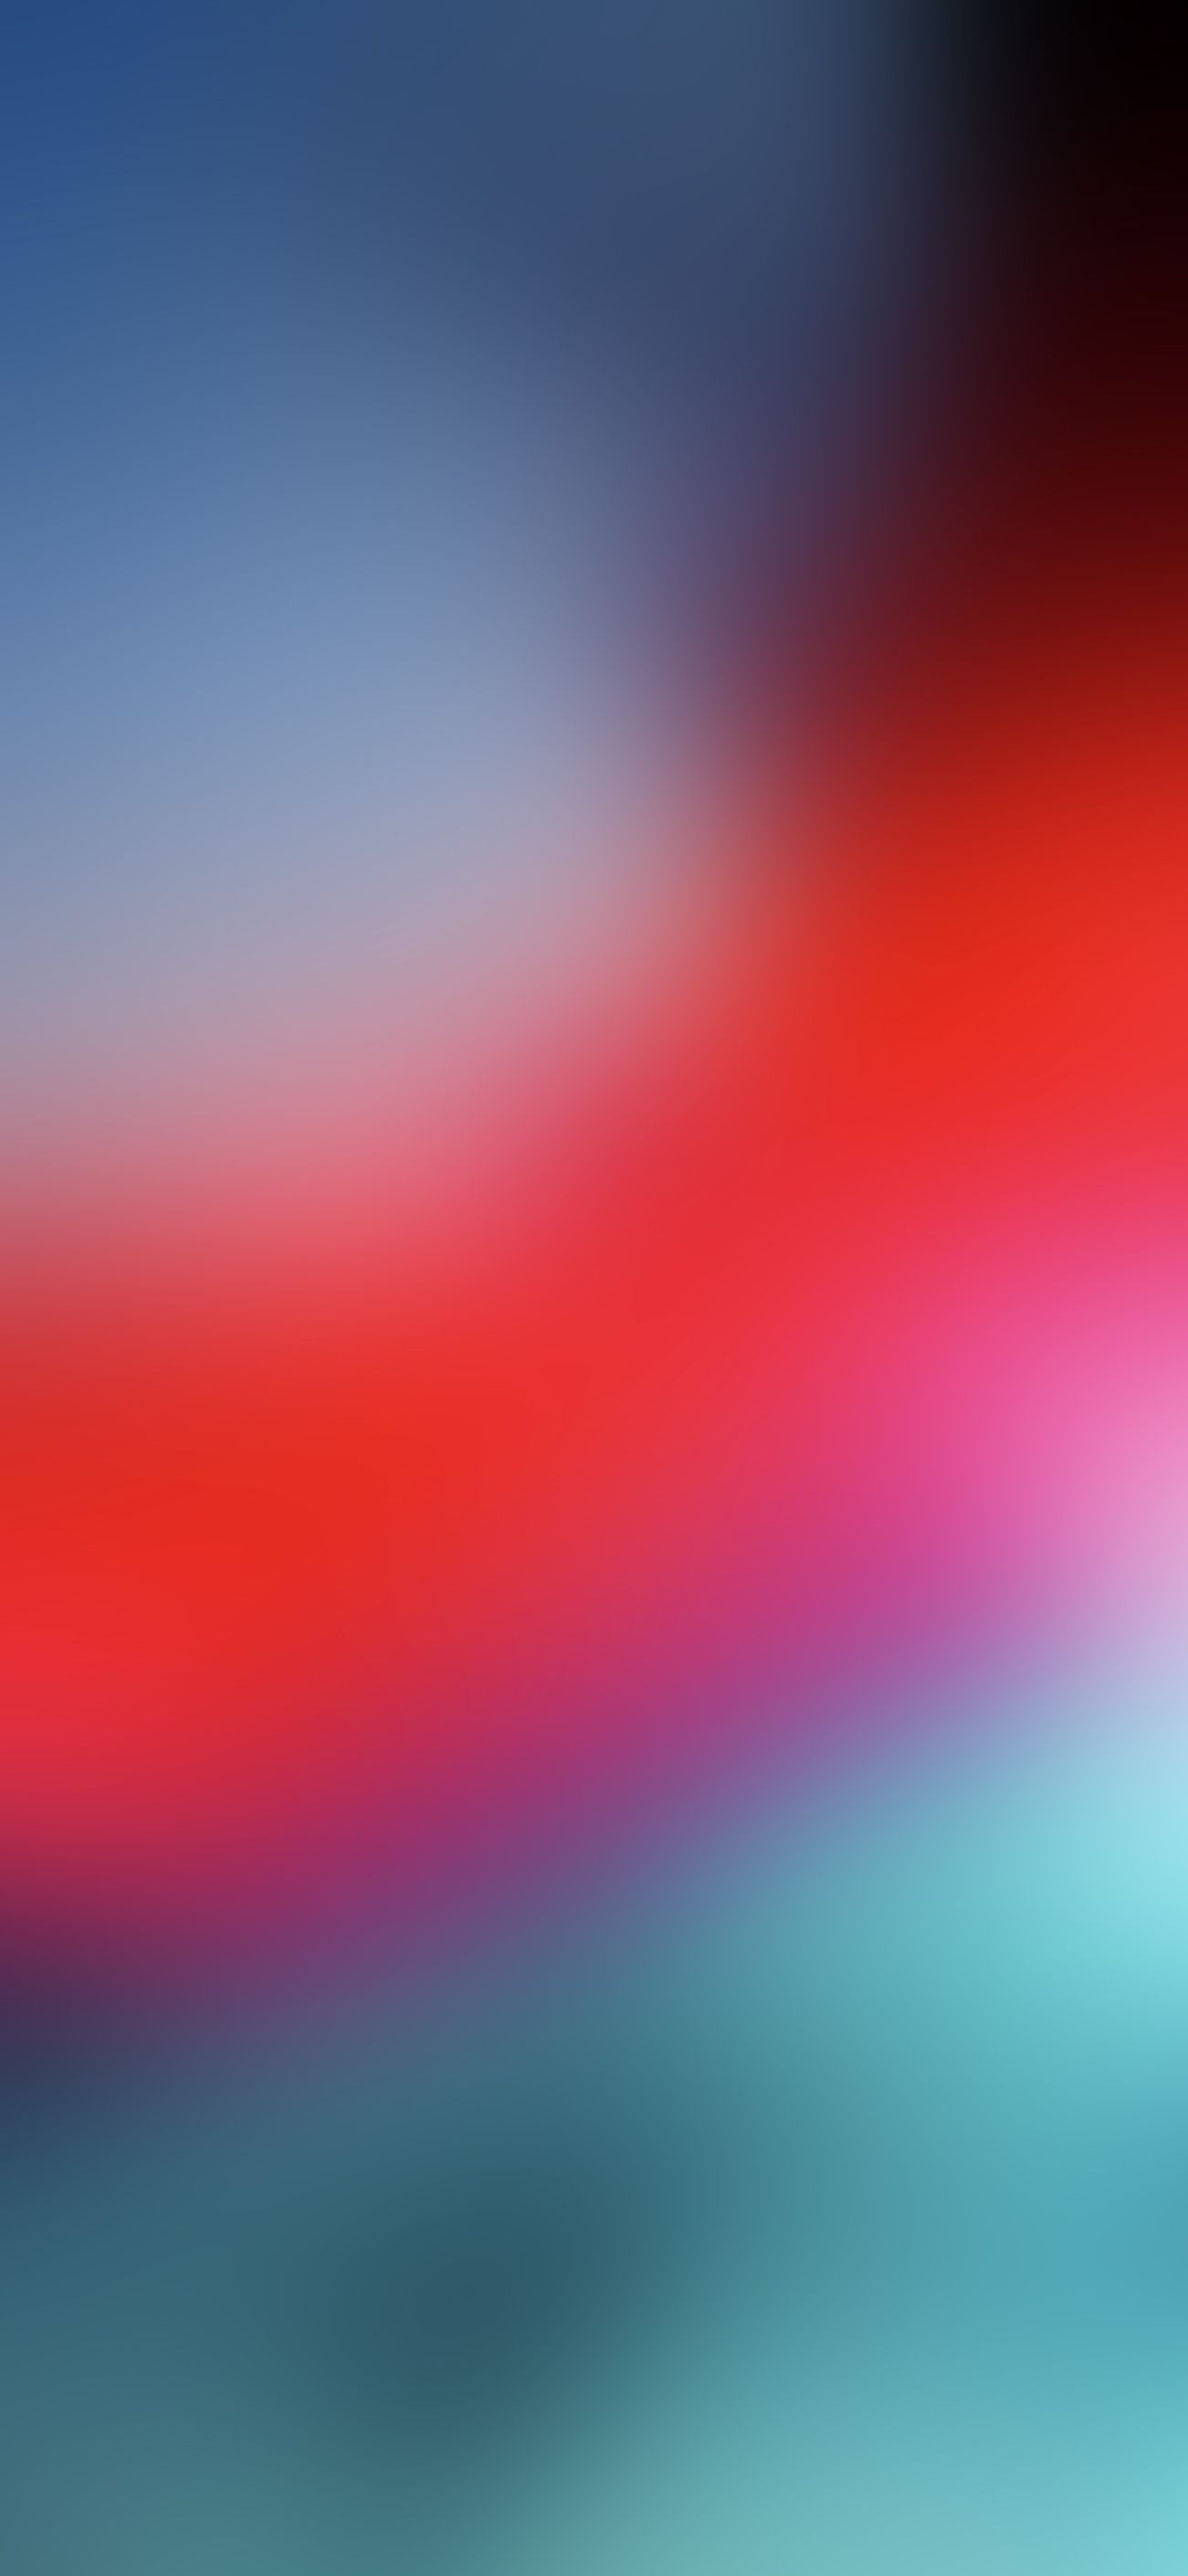 Blurred iOS 12 Stock Wallpapers